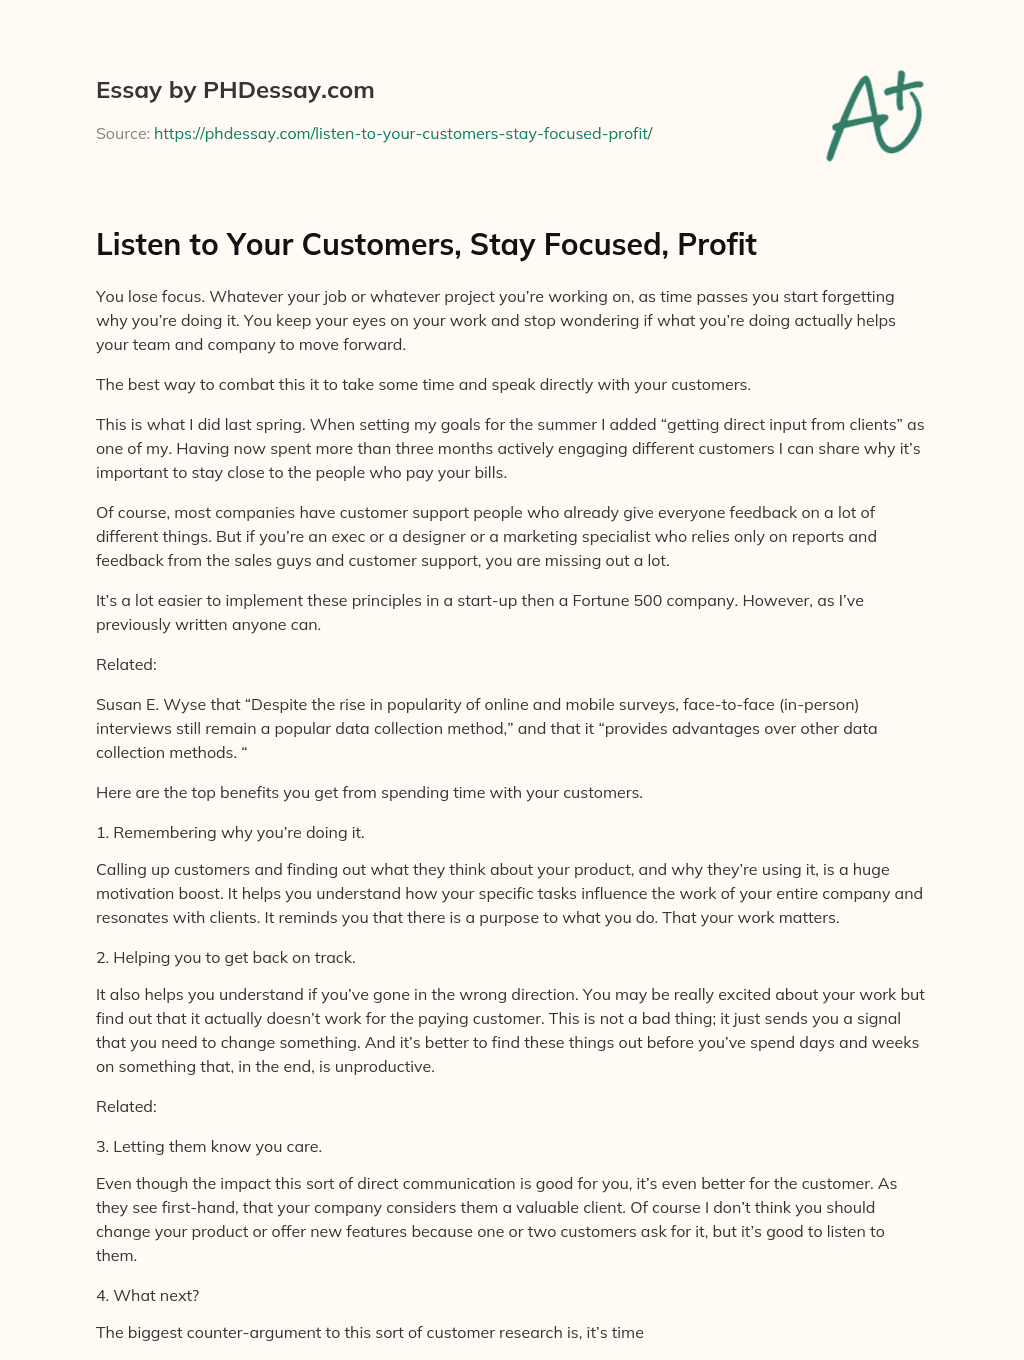 Listen to Your Customers, Stay Focused, Profit essay